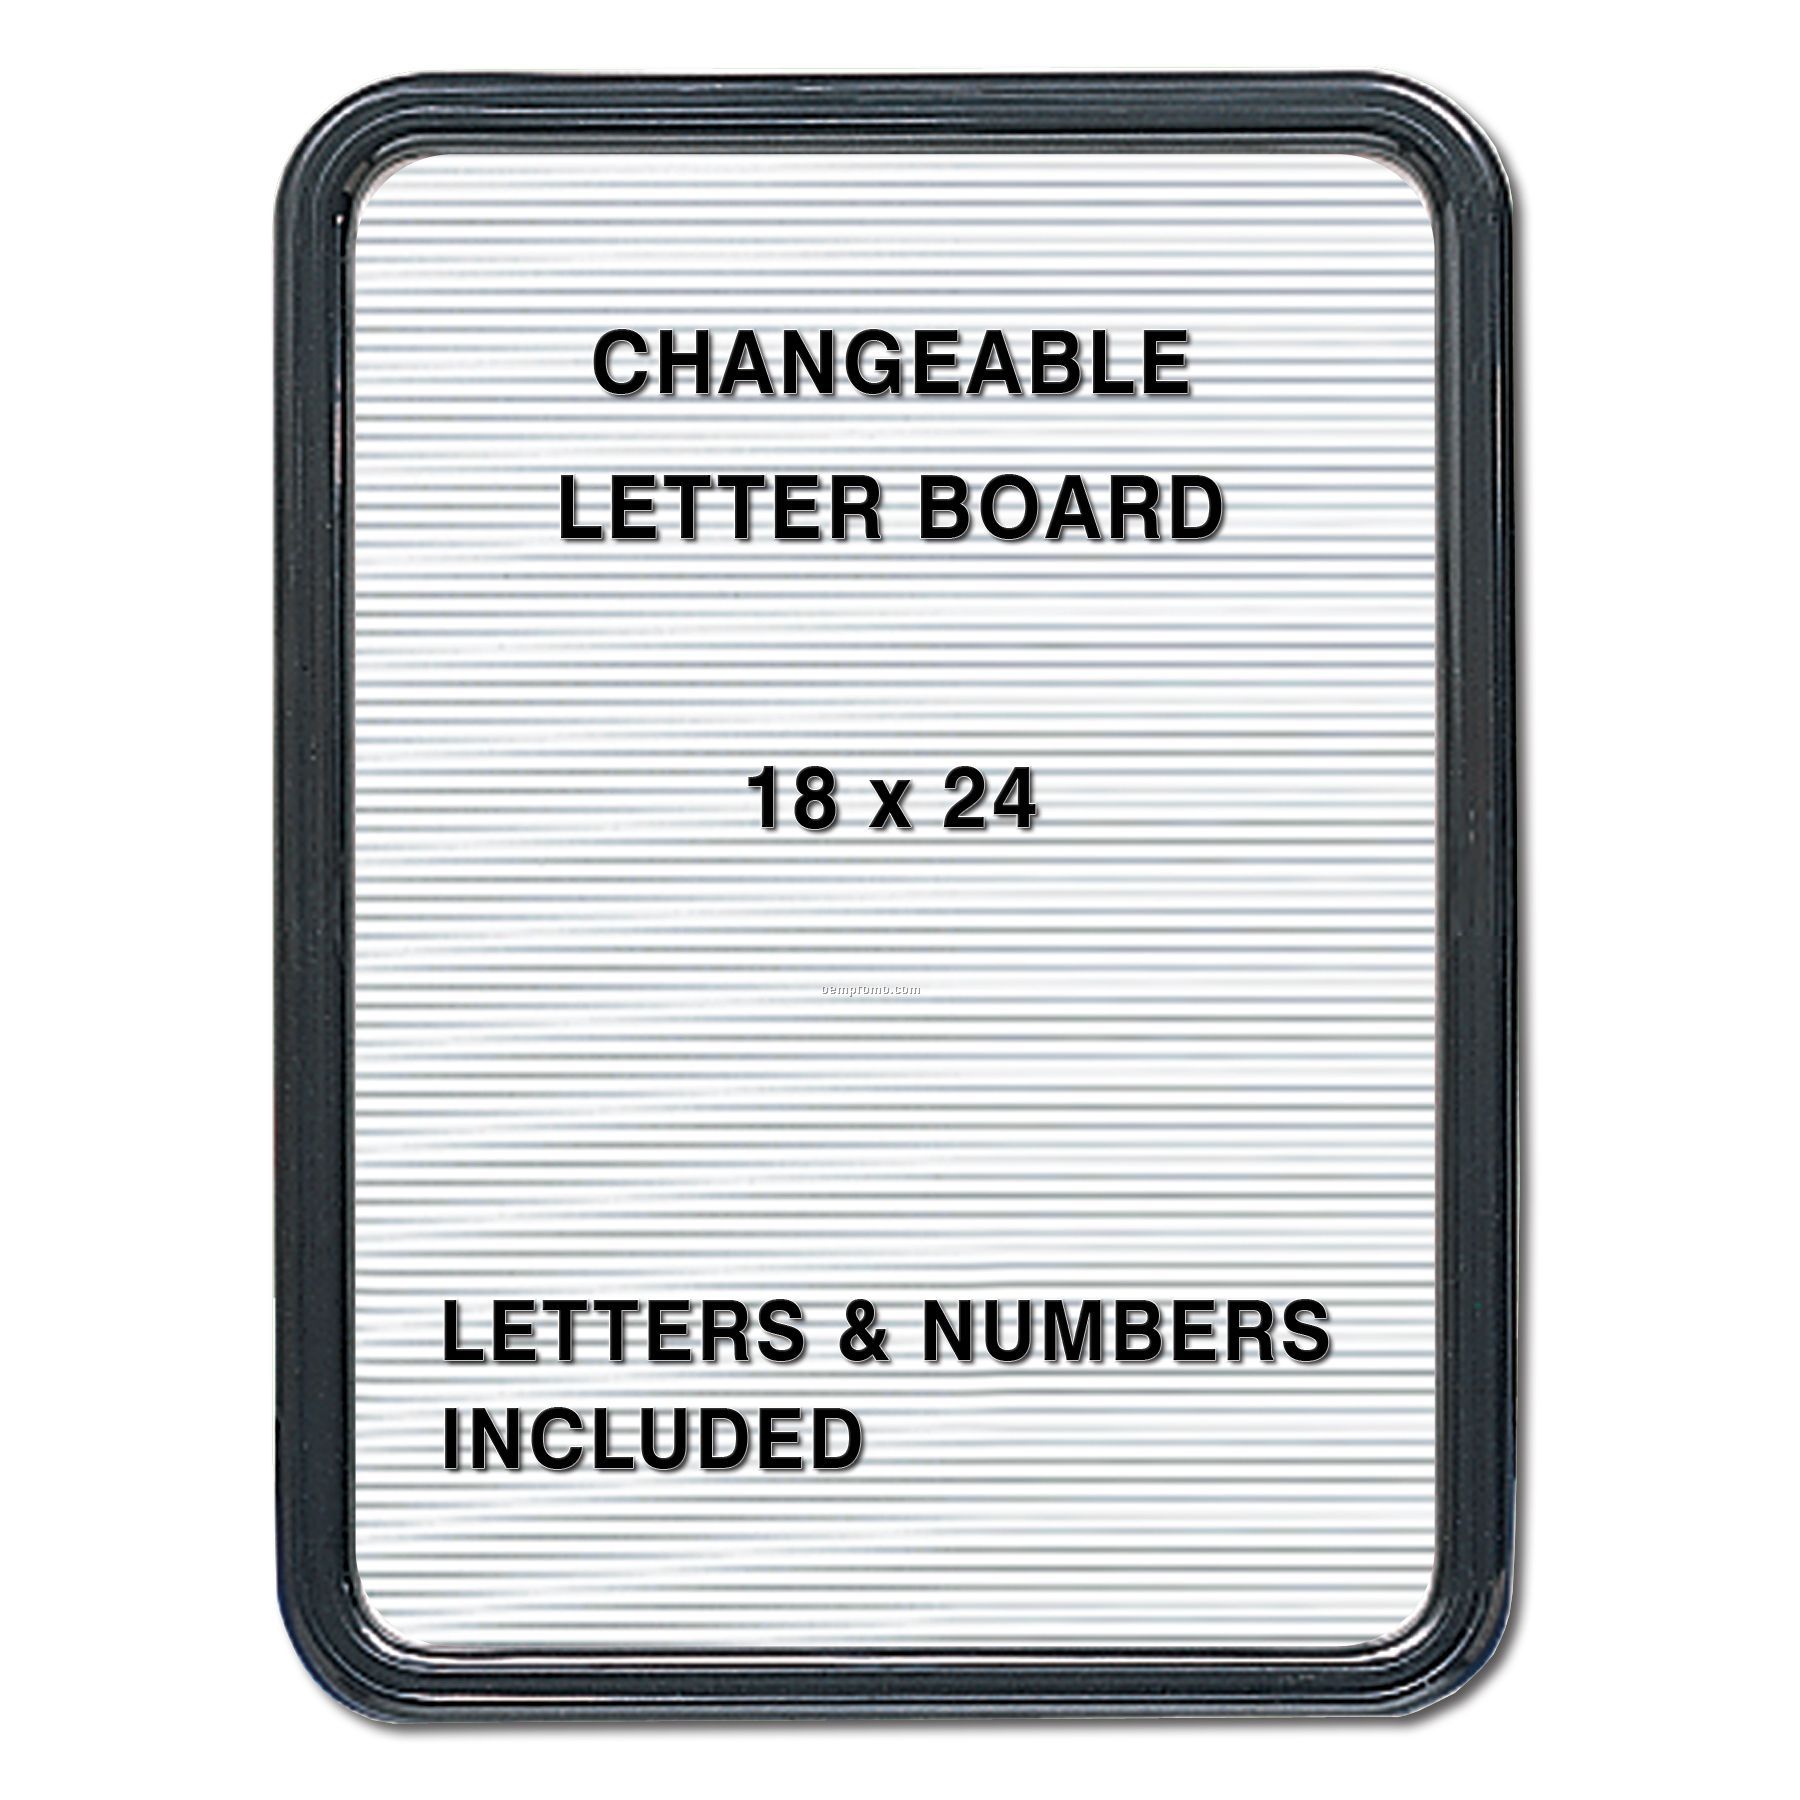 Changeable Letter Board 18"W X 24"H Black Frame With White Letter Panel.